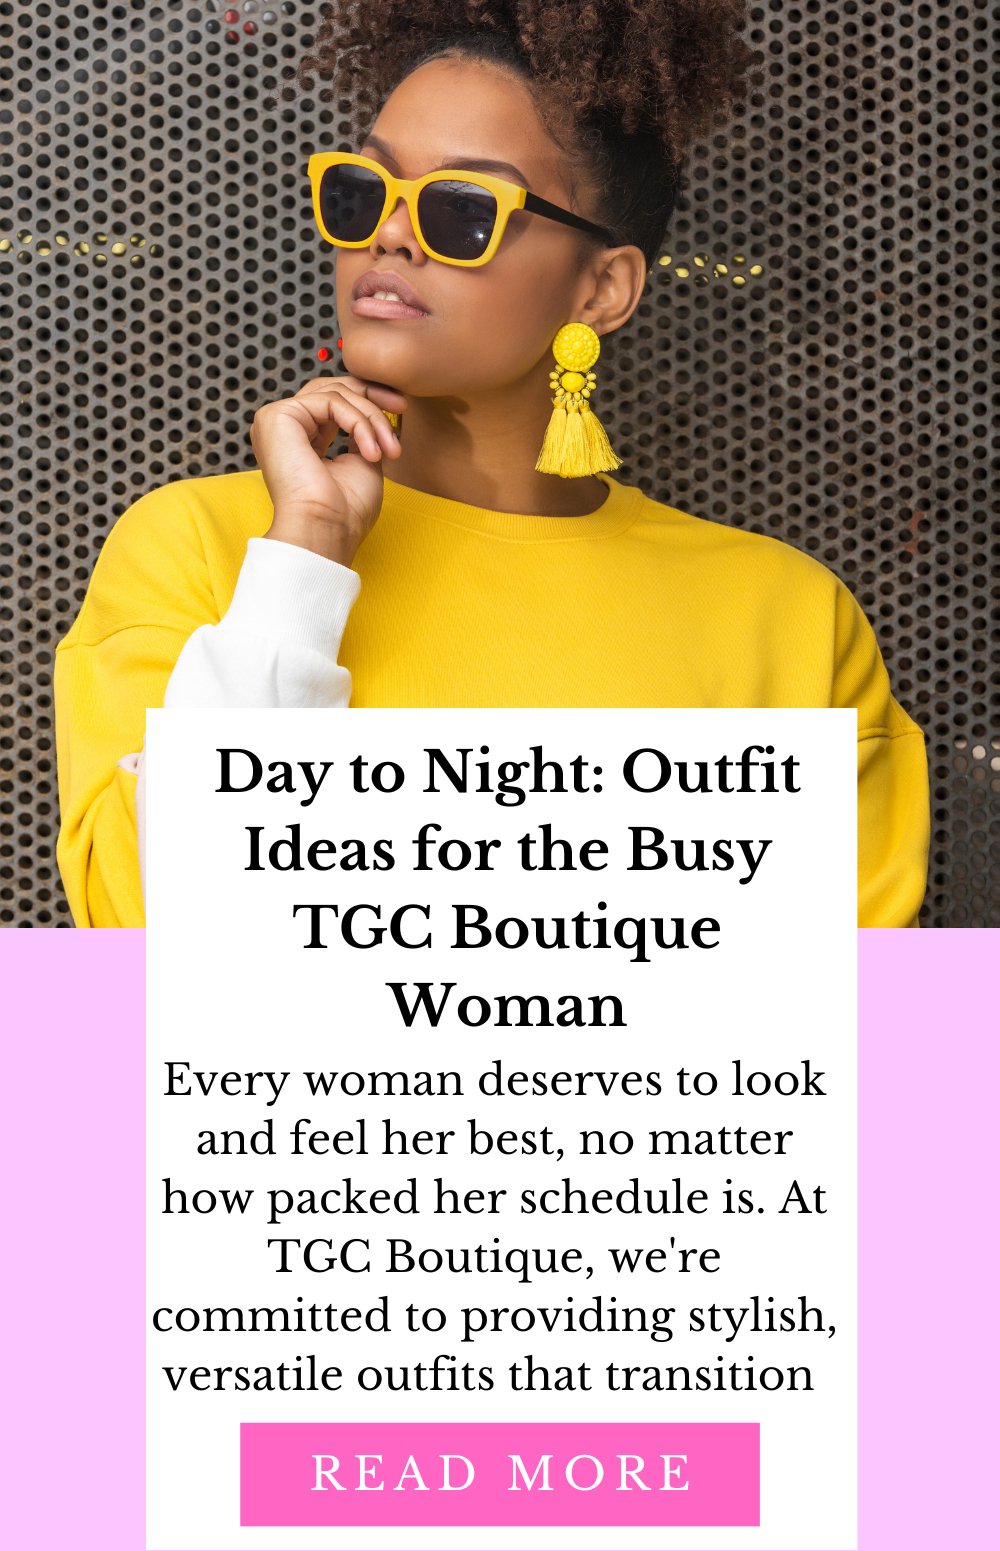 Day to Night: Outfit Ideas for the Busy TGC Boutique Woman - TGC Boutique